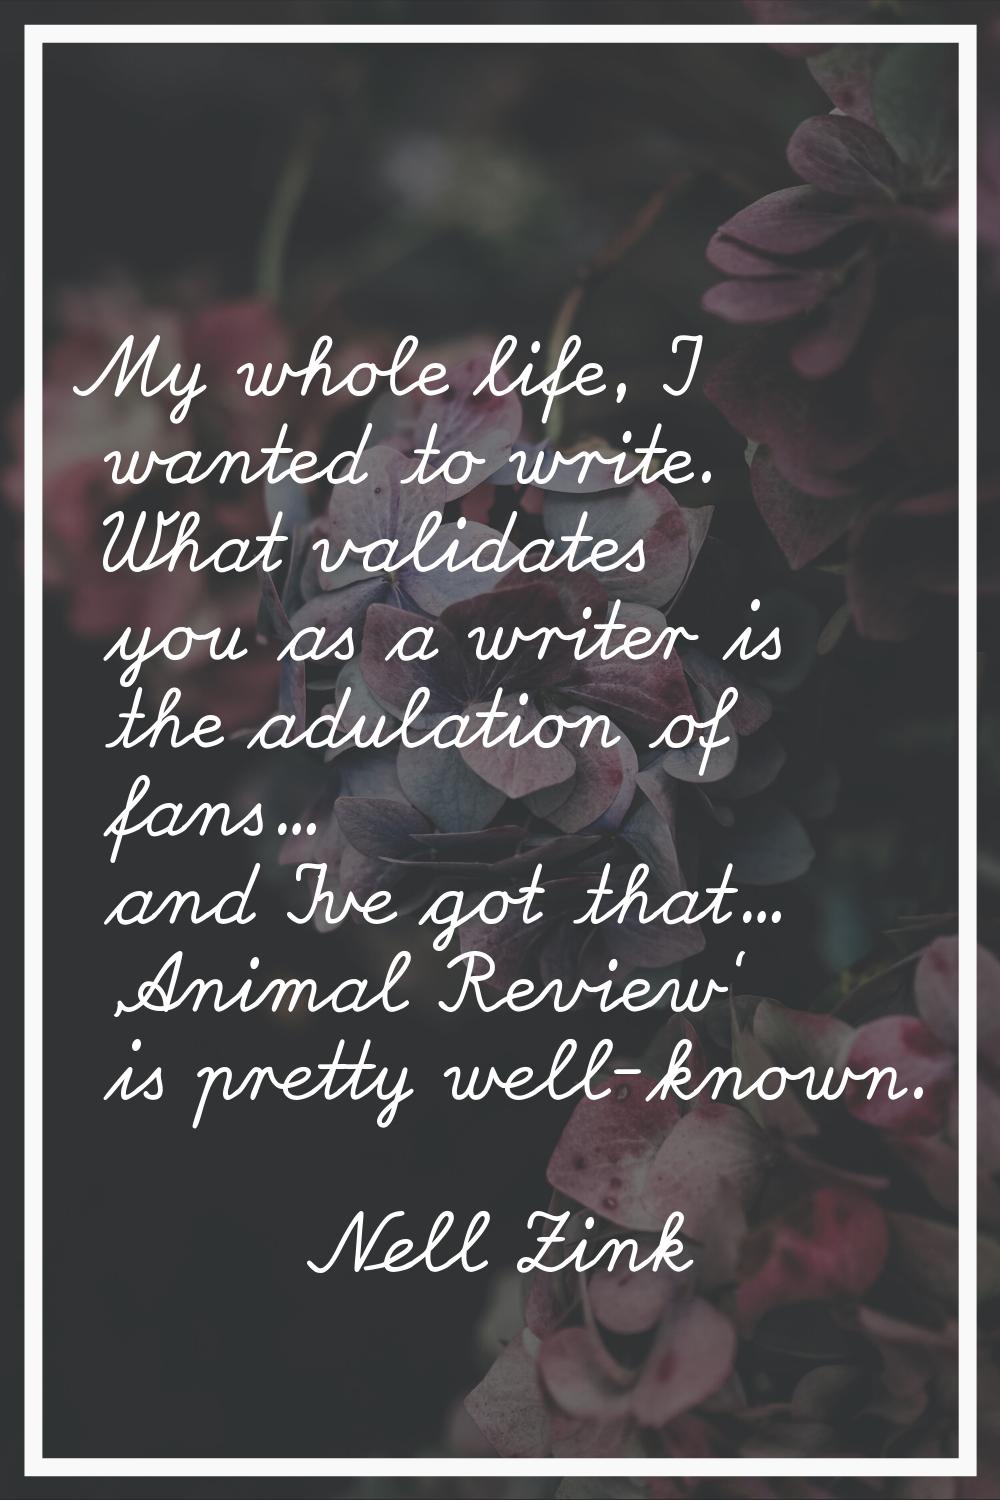 My whole life, I wanted to write. What validates you as a writer is the adulation of fans... and I'